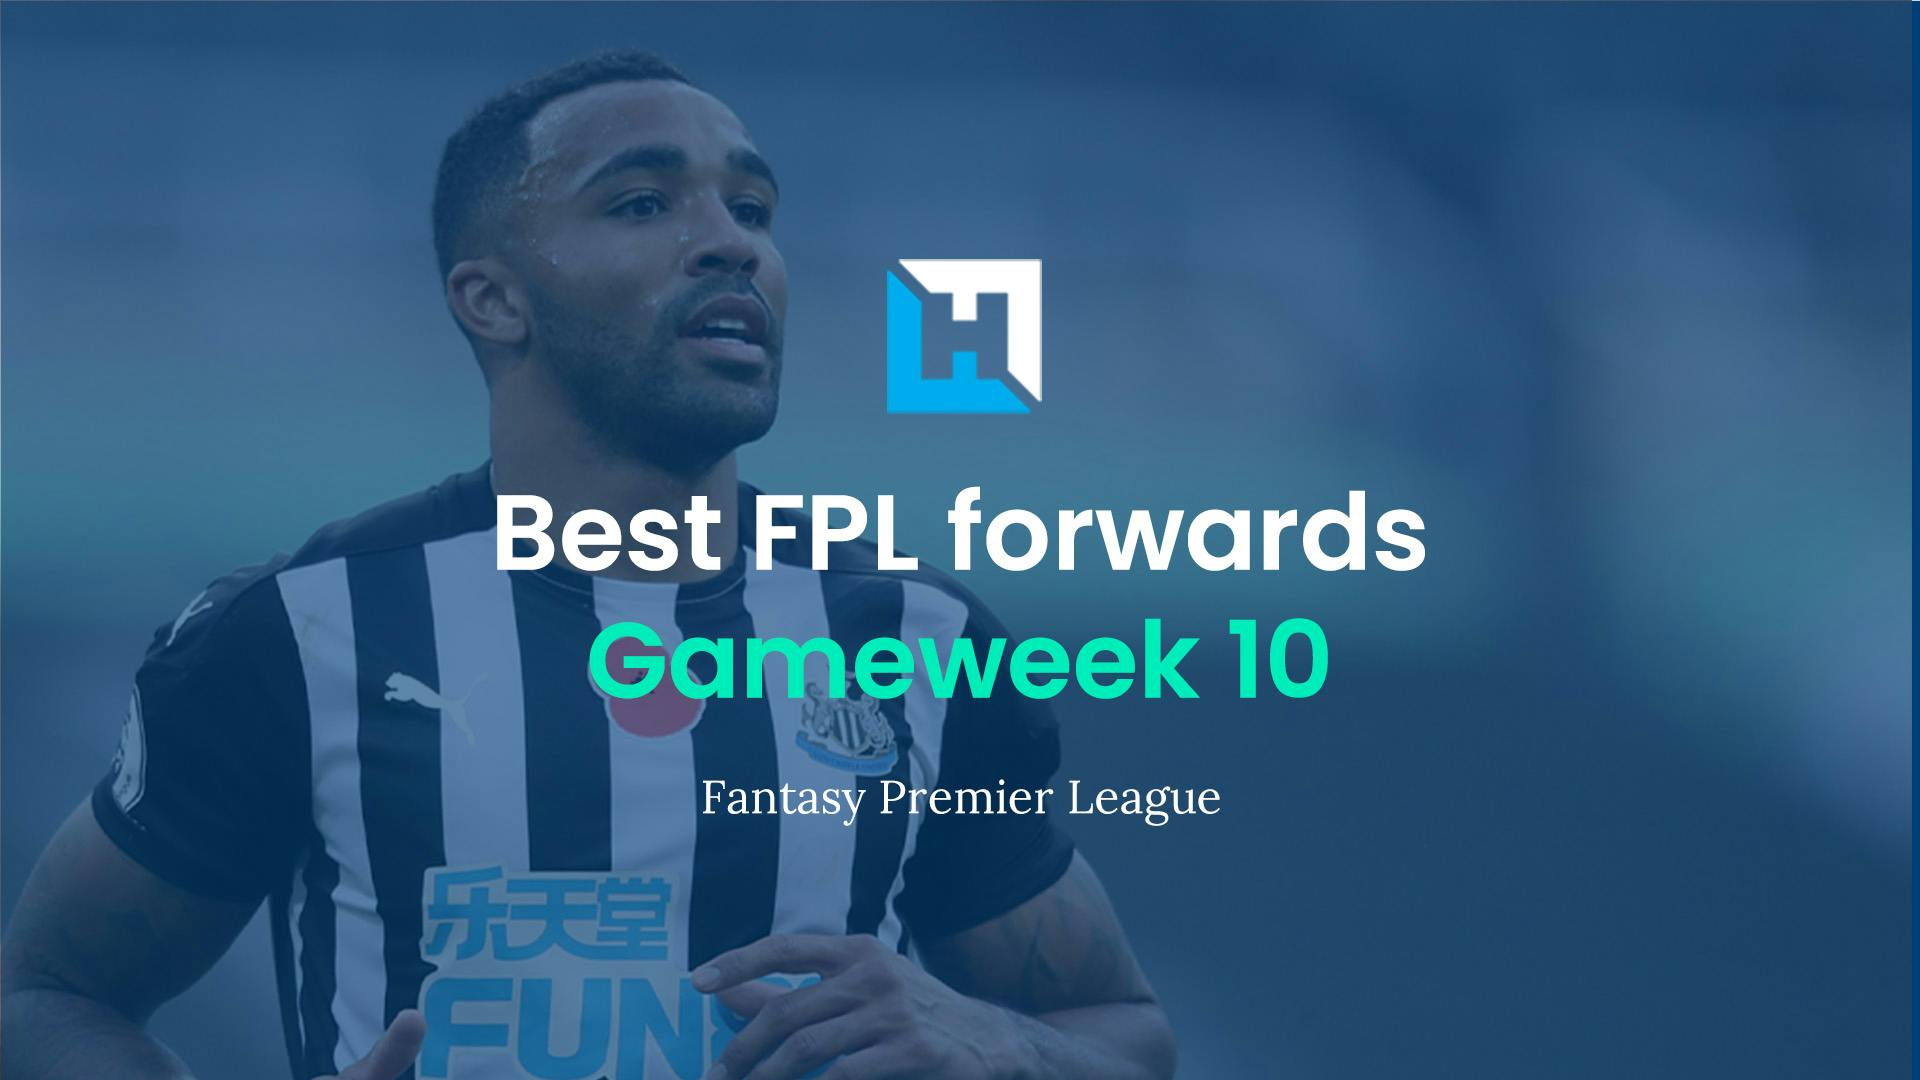 Best FPL players for Gameweek 10: Top 5 best forwards